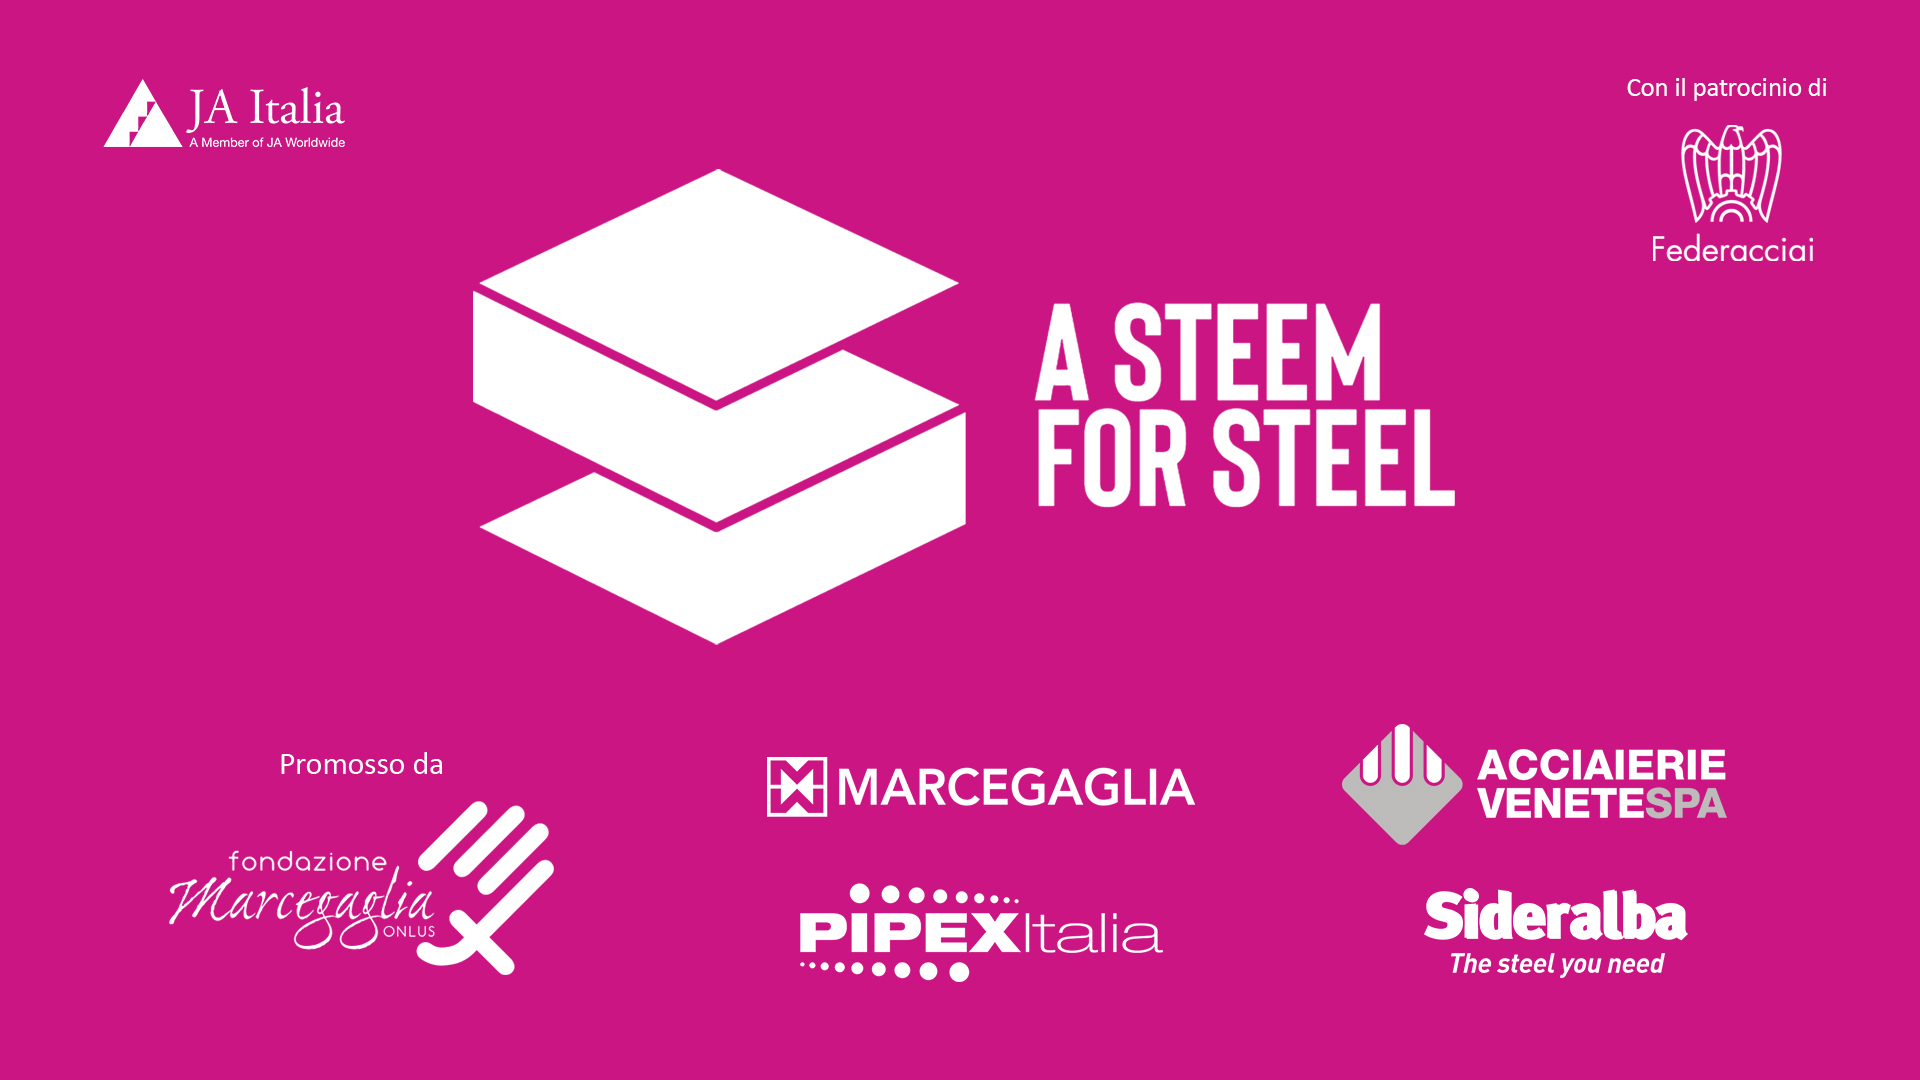 A Steem for Steel